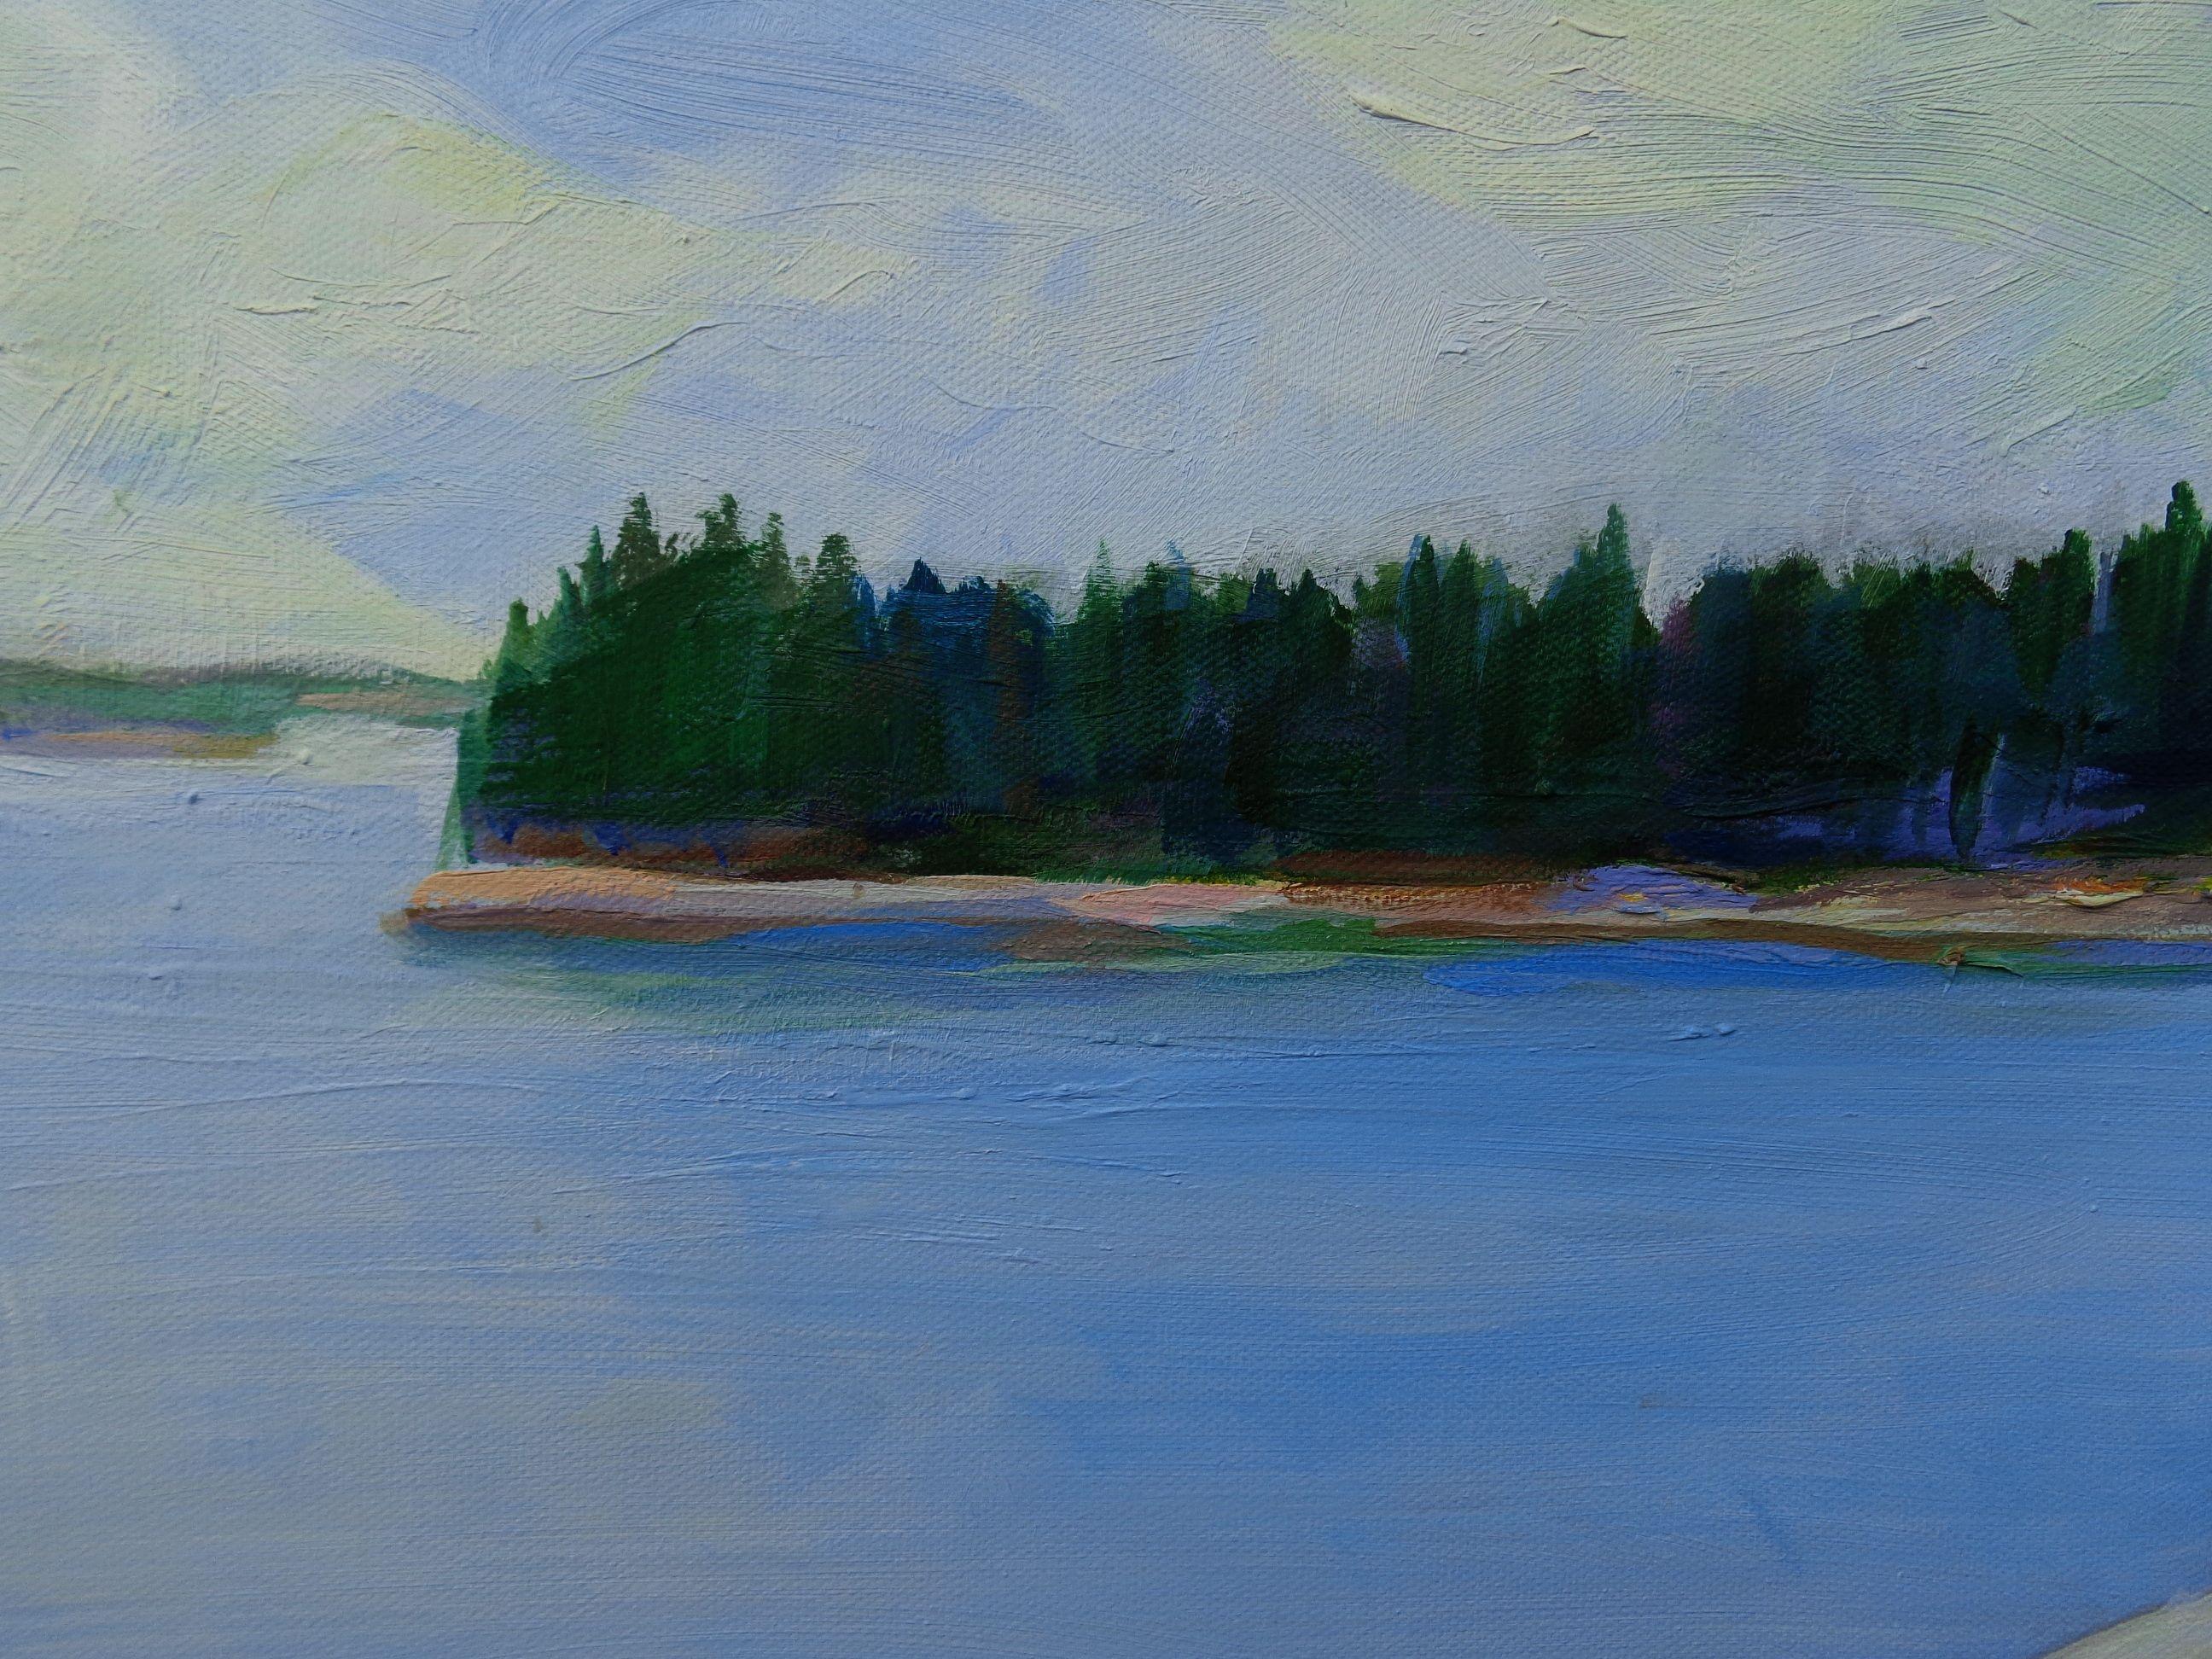 Off of the coast of northern Maine, the ocean is dotted with small  islands offshore. The colors are cool - blues, whites and greys. And pine trees somehow manage to  grow and withstand  the limited soil and harsh weather.  It's a remote, serene